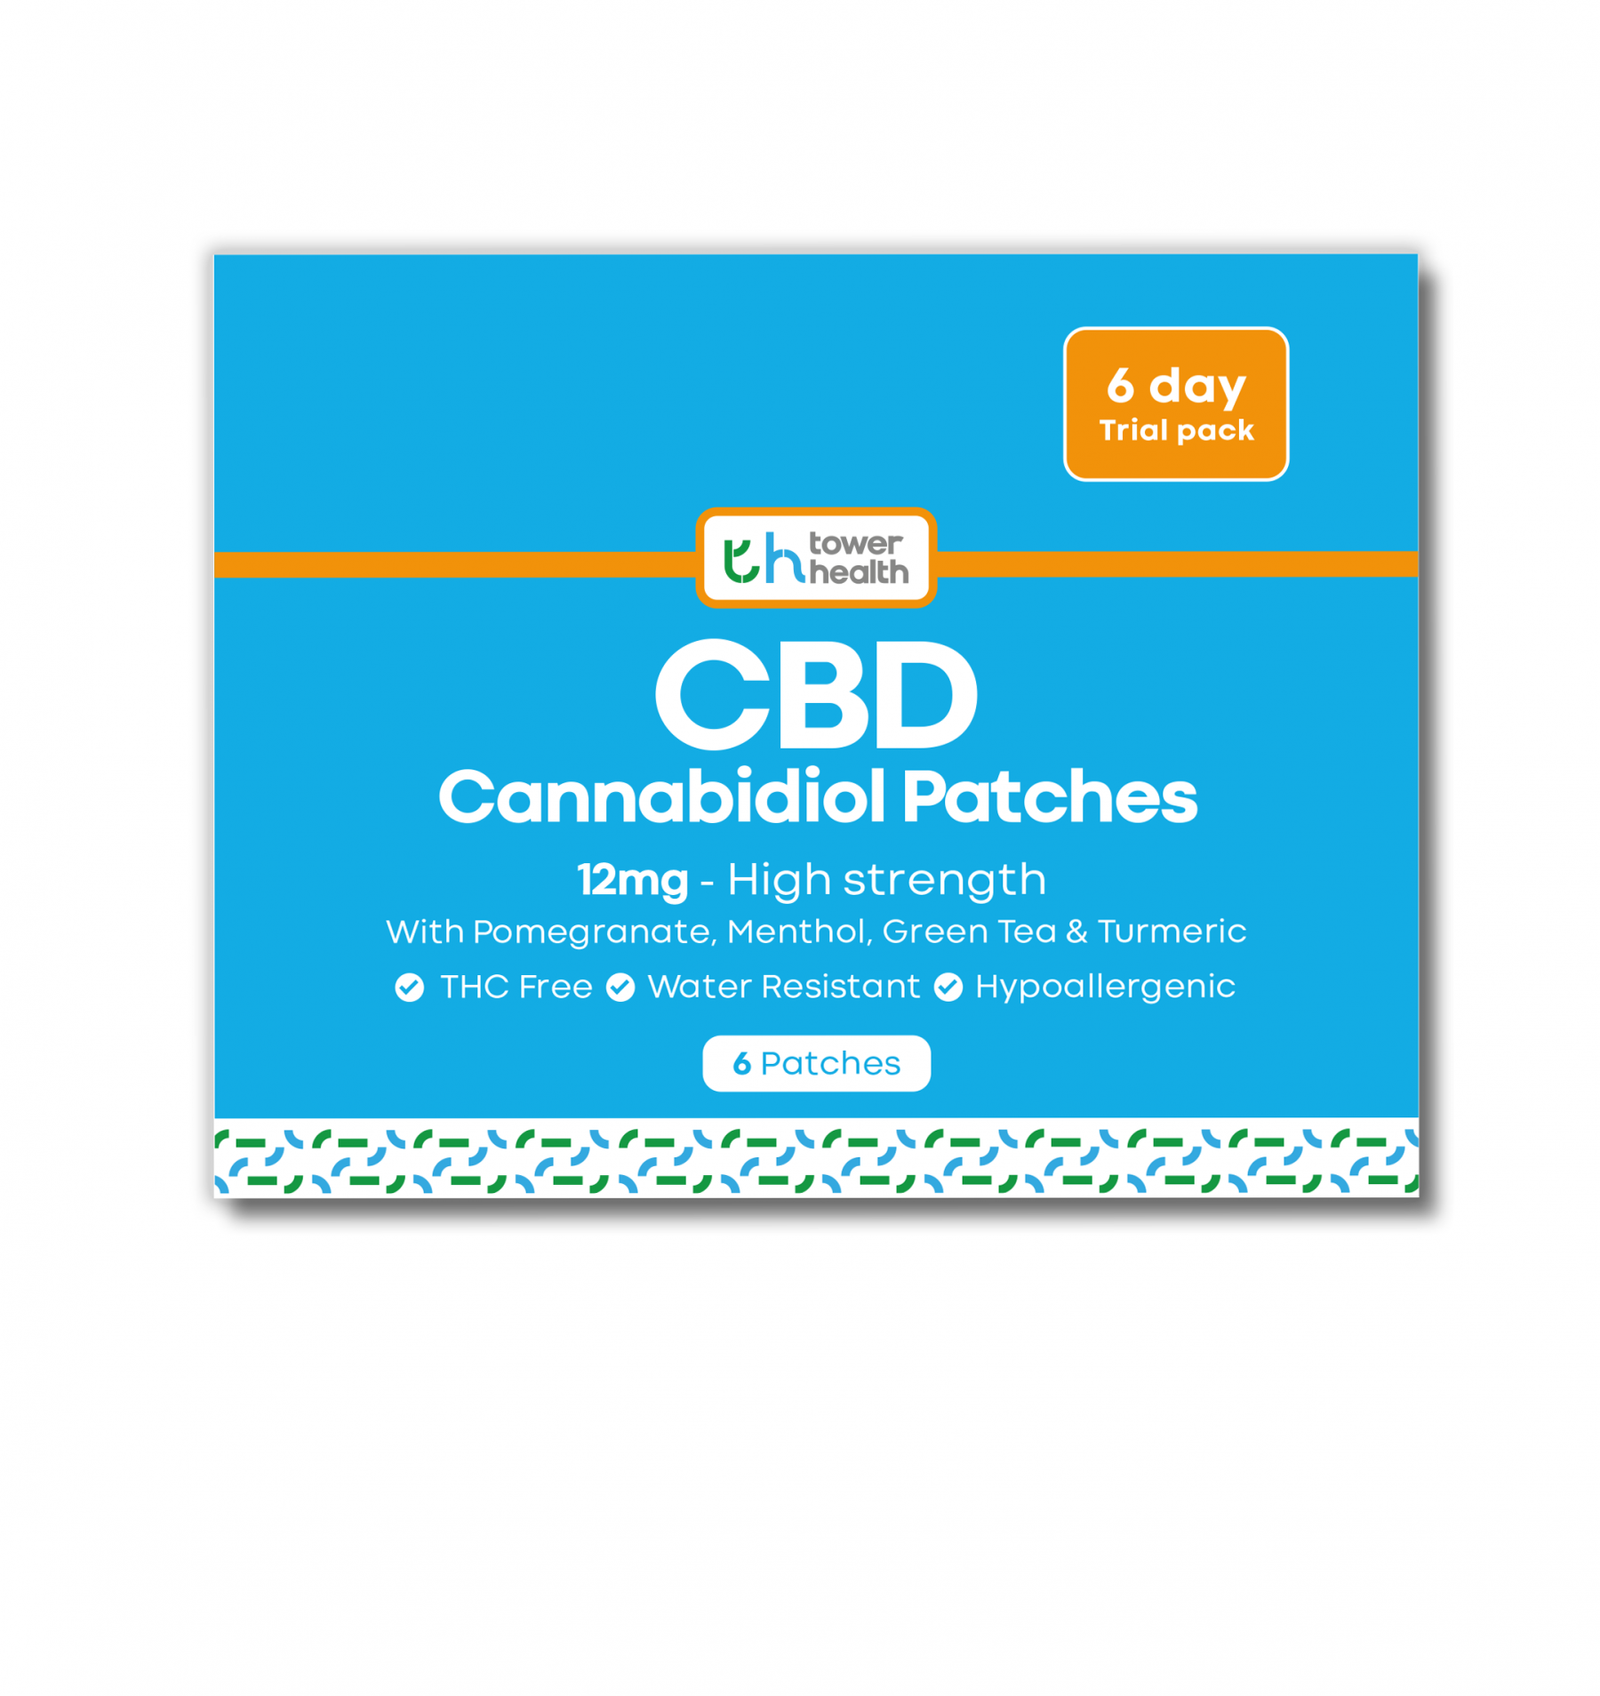 Tower Health CBD patches